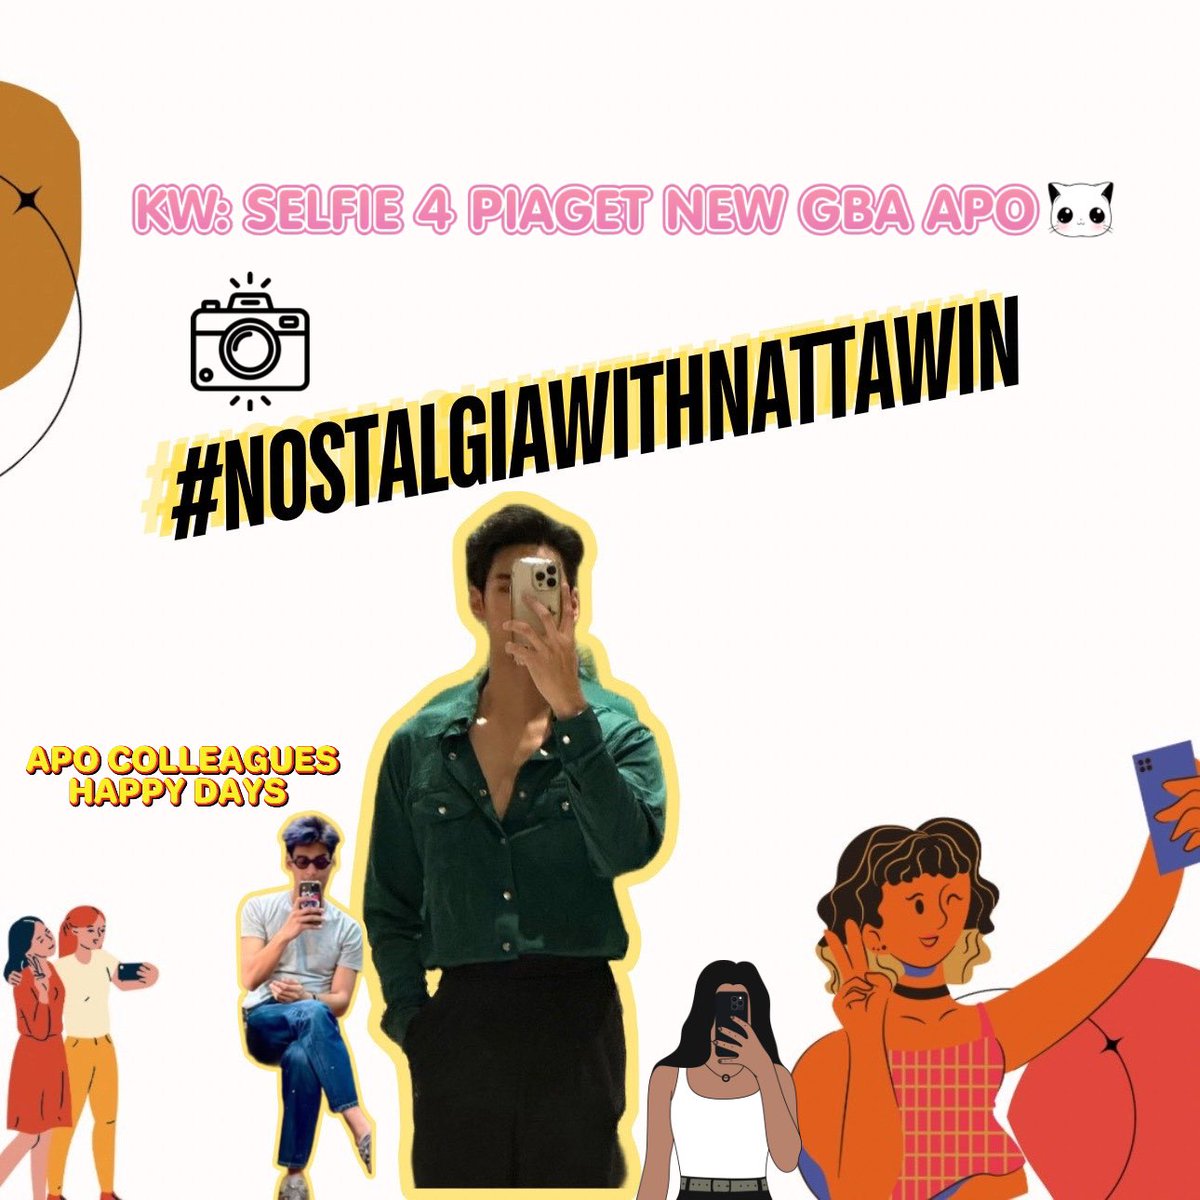 Dear #apocolleagues 🤗, Let’s come together to celebrate this special occasion in honor of APO NATTAWIN PIAGET GLOBAL AMBASSADOR. Let’s share our joy and appreciation with Apo on this Nostalgia day. 📅 April 24 #️⃣.NostalgiaWithNattawin ❗KW mentioned in the poster